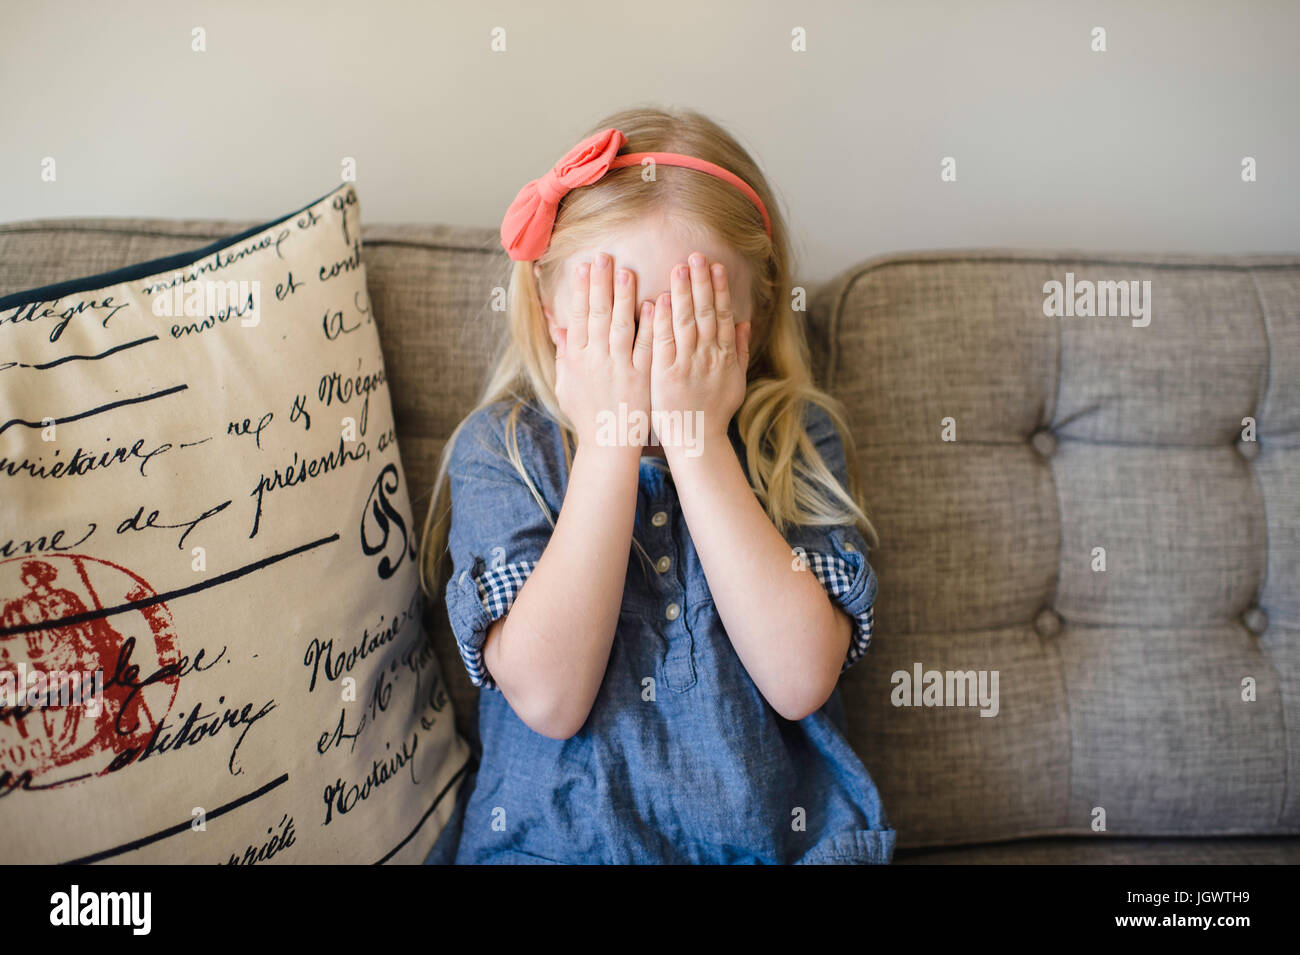 Girl on sofa covering her face with hands Stock Photo